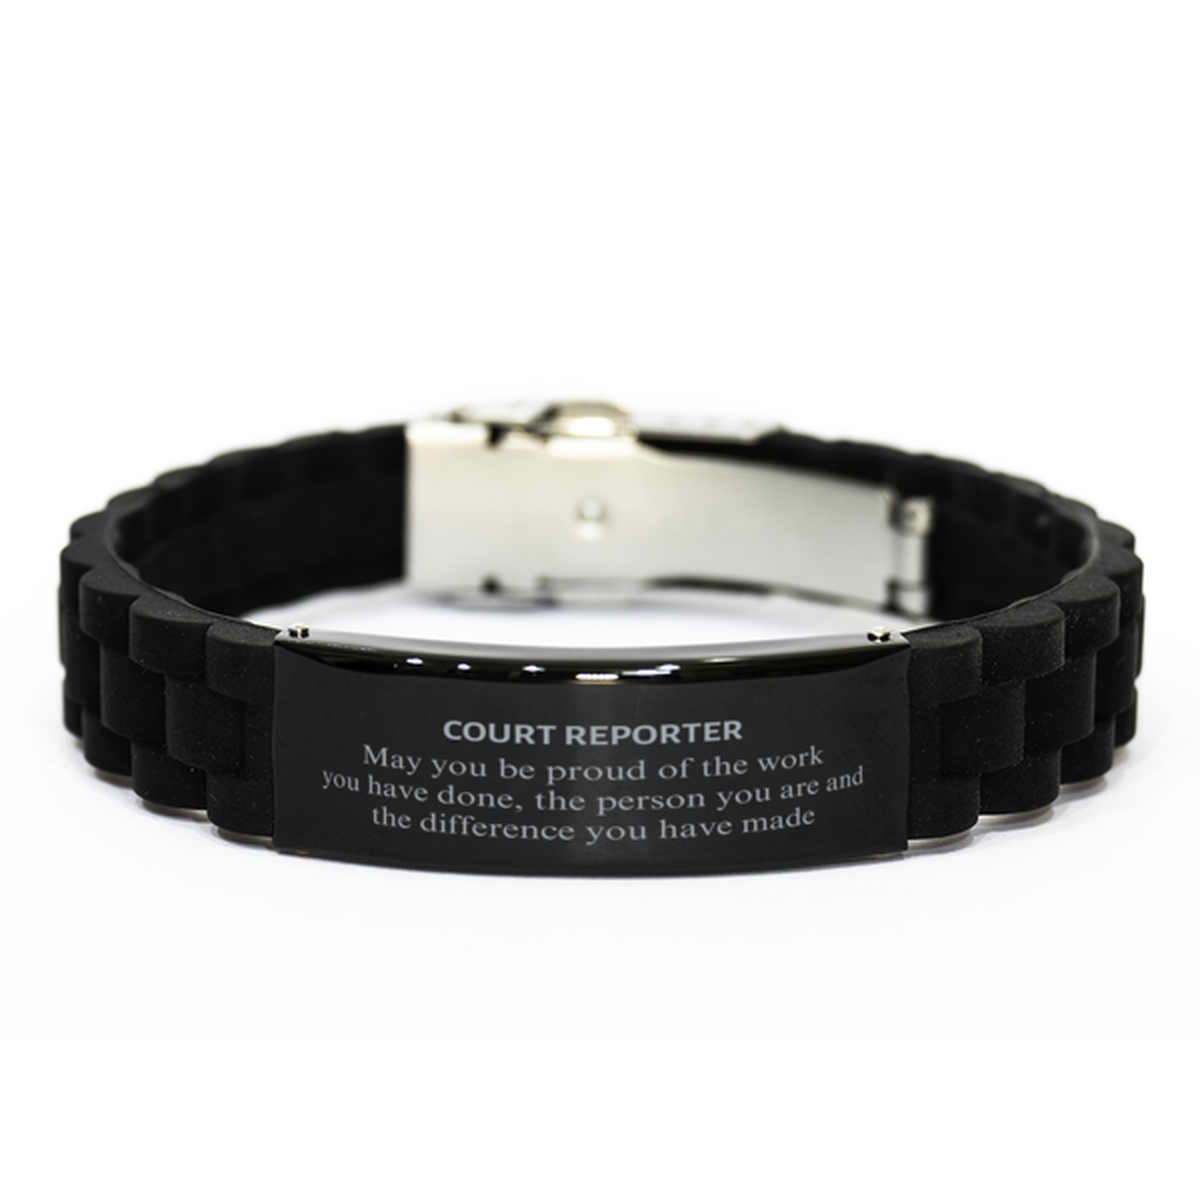 Court Reporter May you be proud of the work you have done, Retirement Court Reporter Black Glidelock Clasp Bracelet for Colleague Appreciation Gifts Amazing for Court Reporter